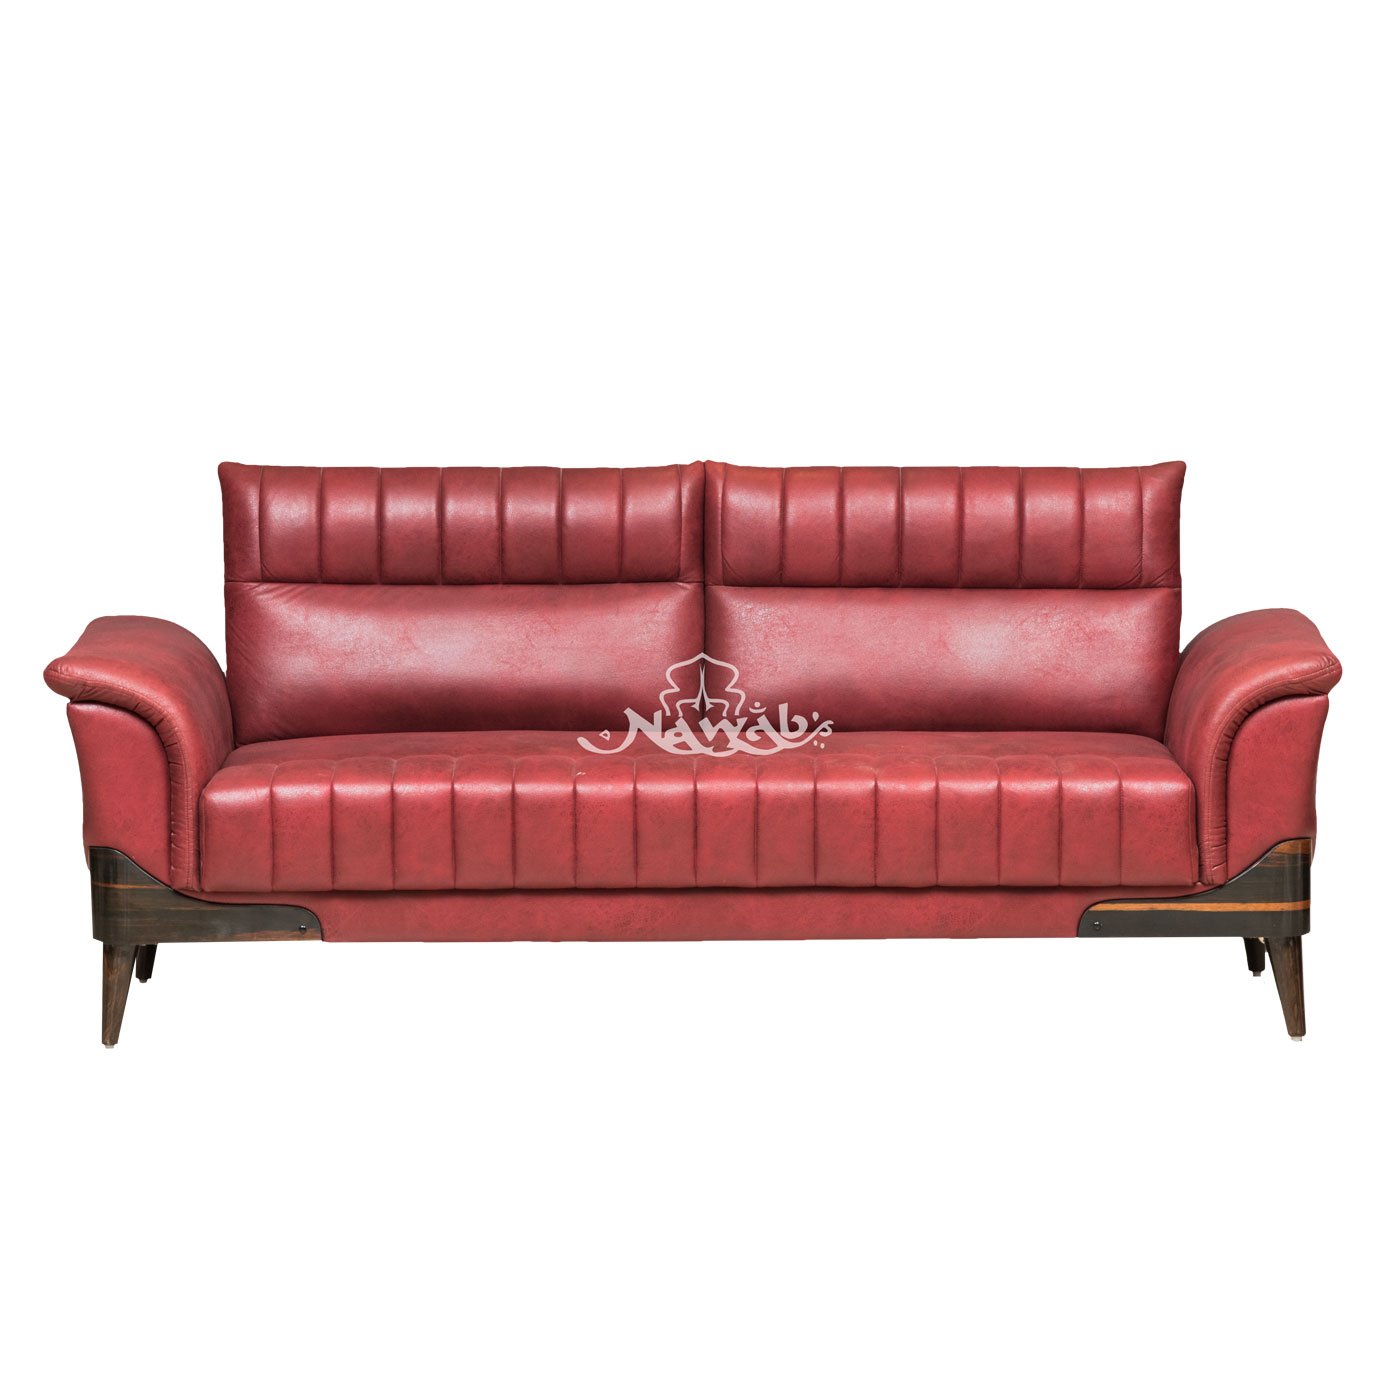 1400px x 1400px - Suede fabric 3 seater upholstered sofa sets - Nawab Furniture